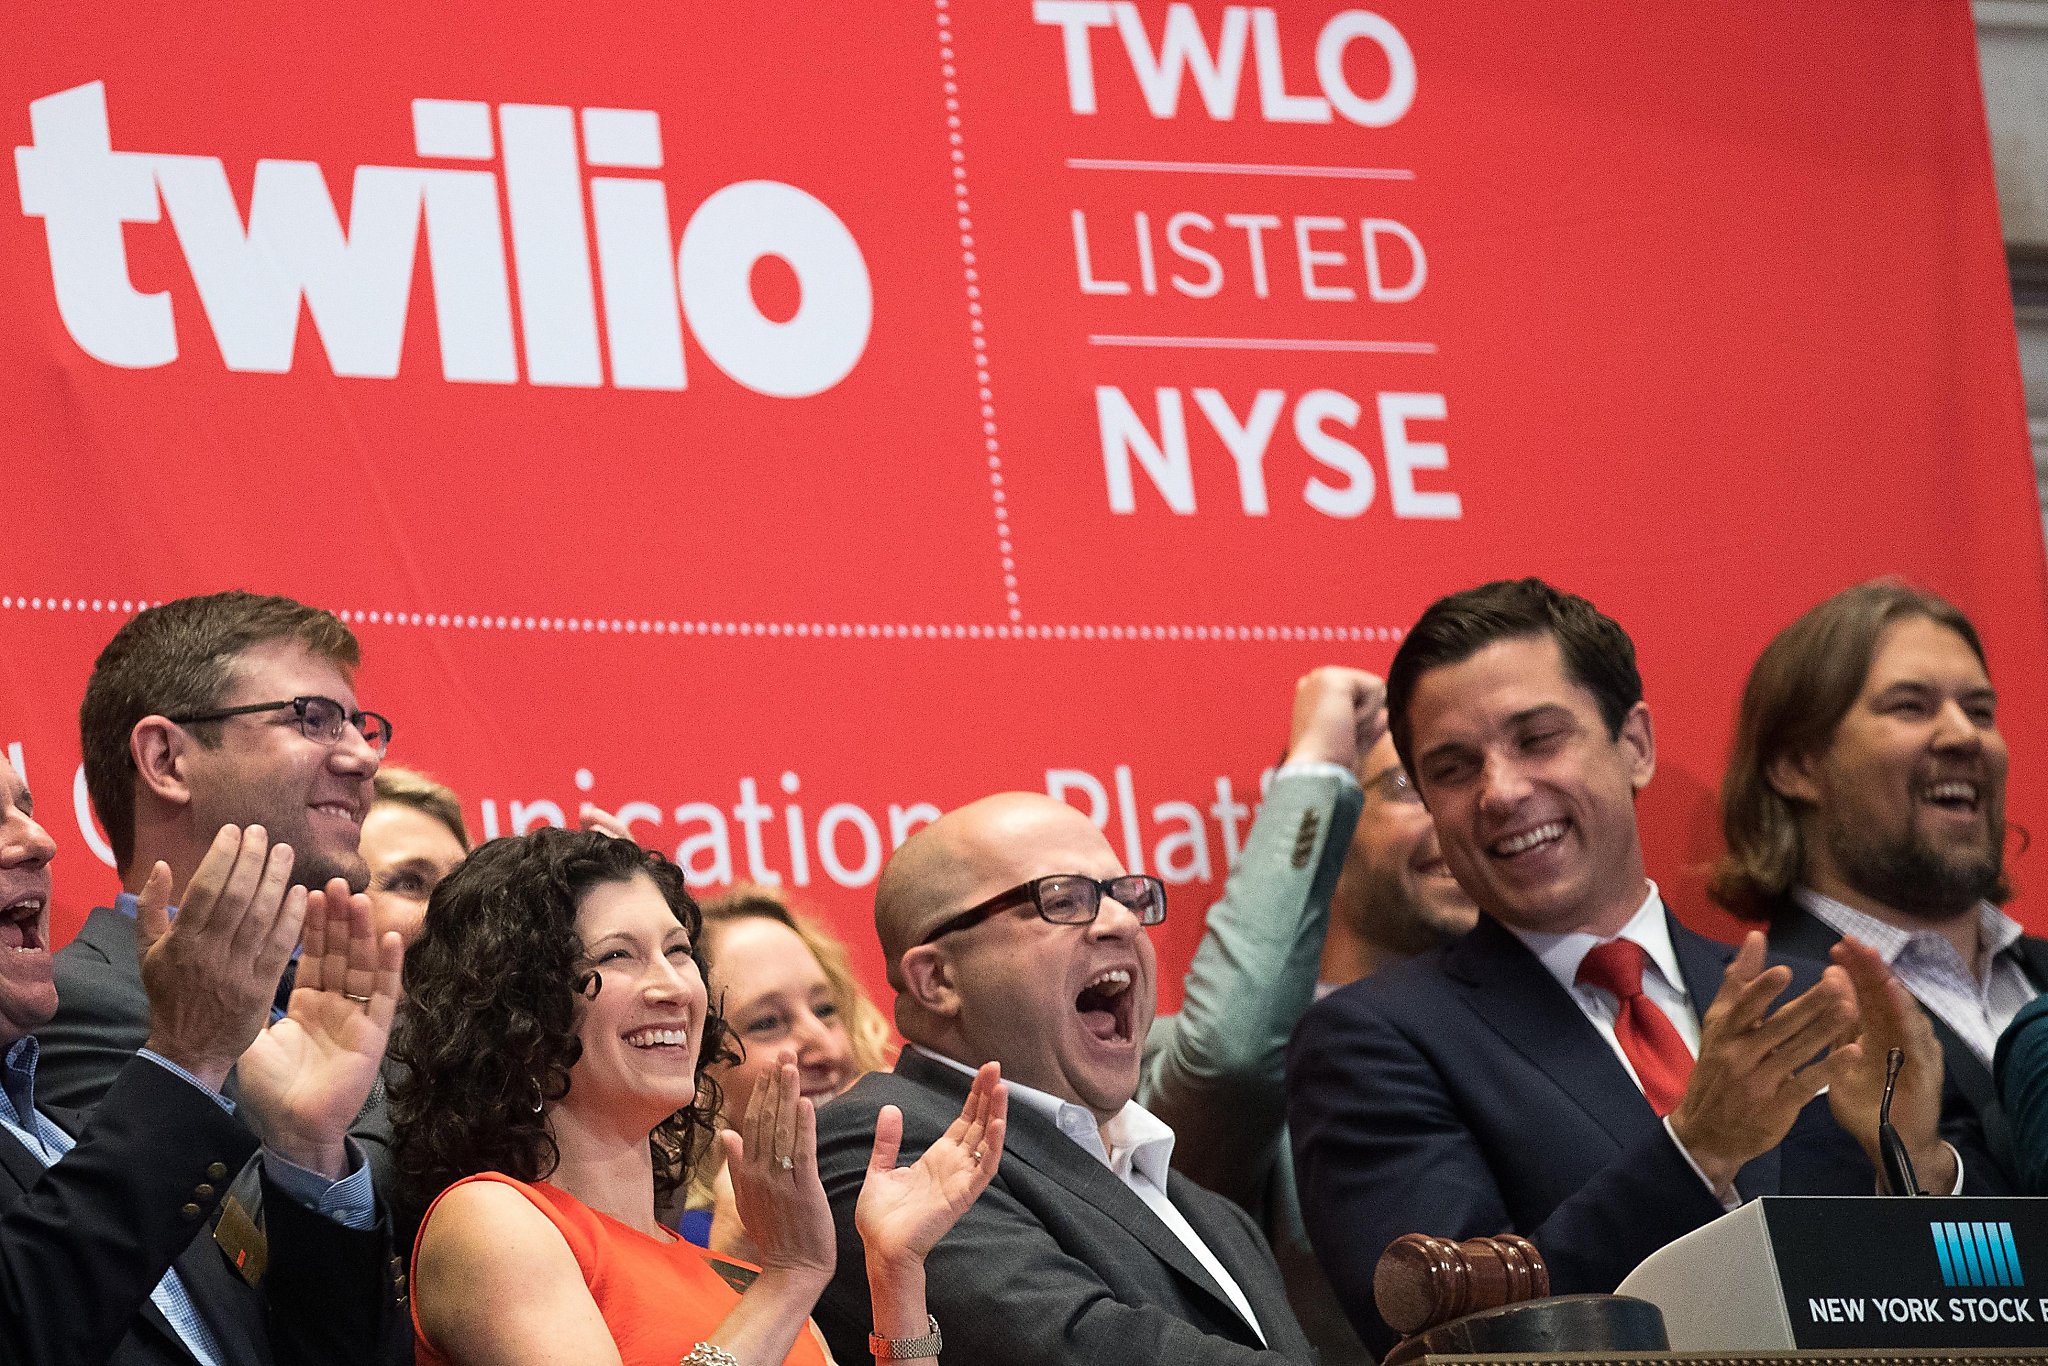 Twilio, SF tech firm, has larger second round of layoffs